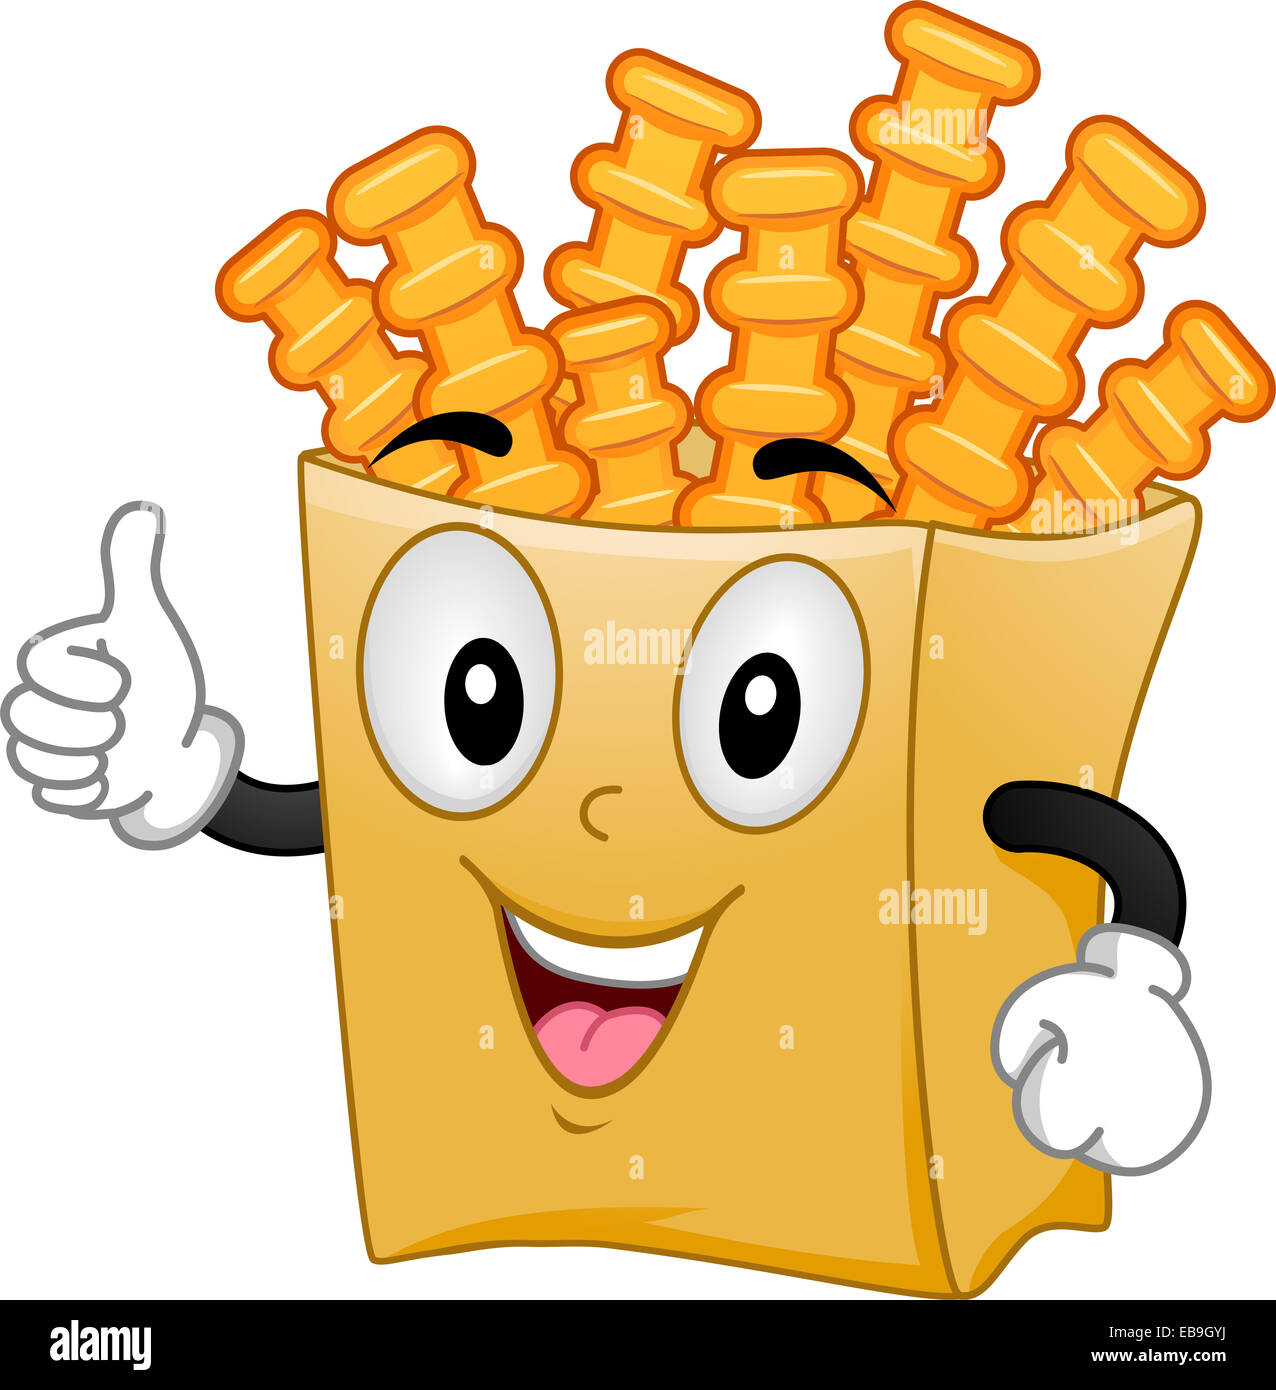 Mascot Illustration Featuring a Pack of Crinkle Cut Fries Giving a Thumbs Up Stock Photo